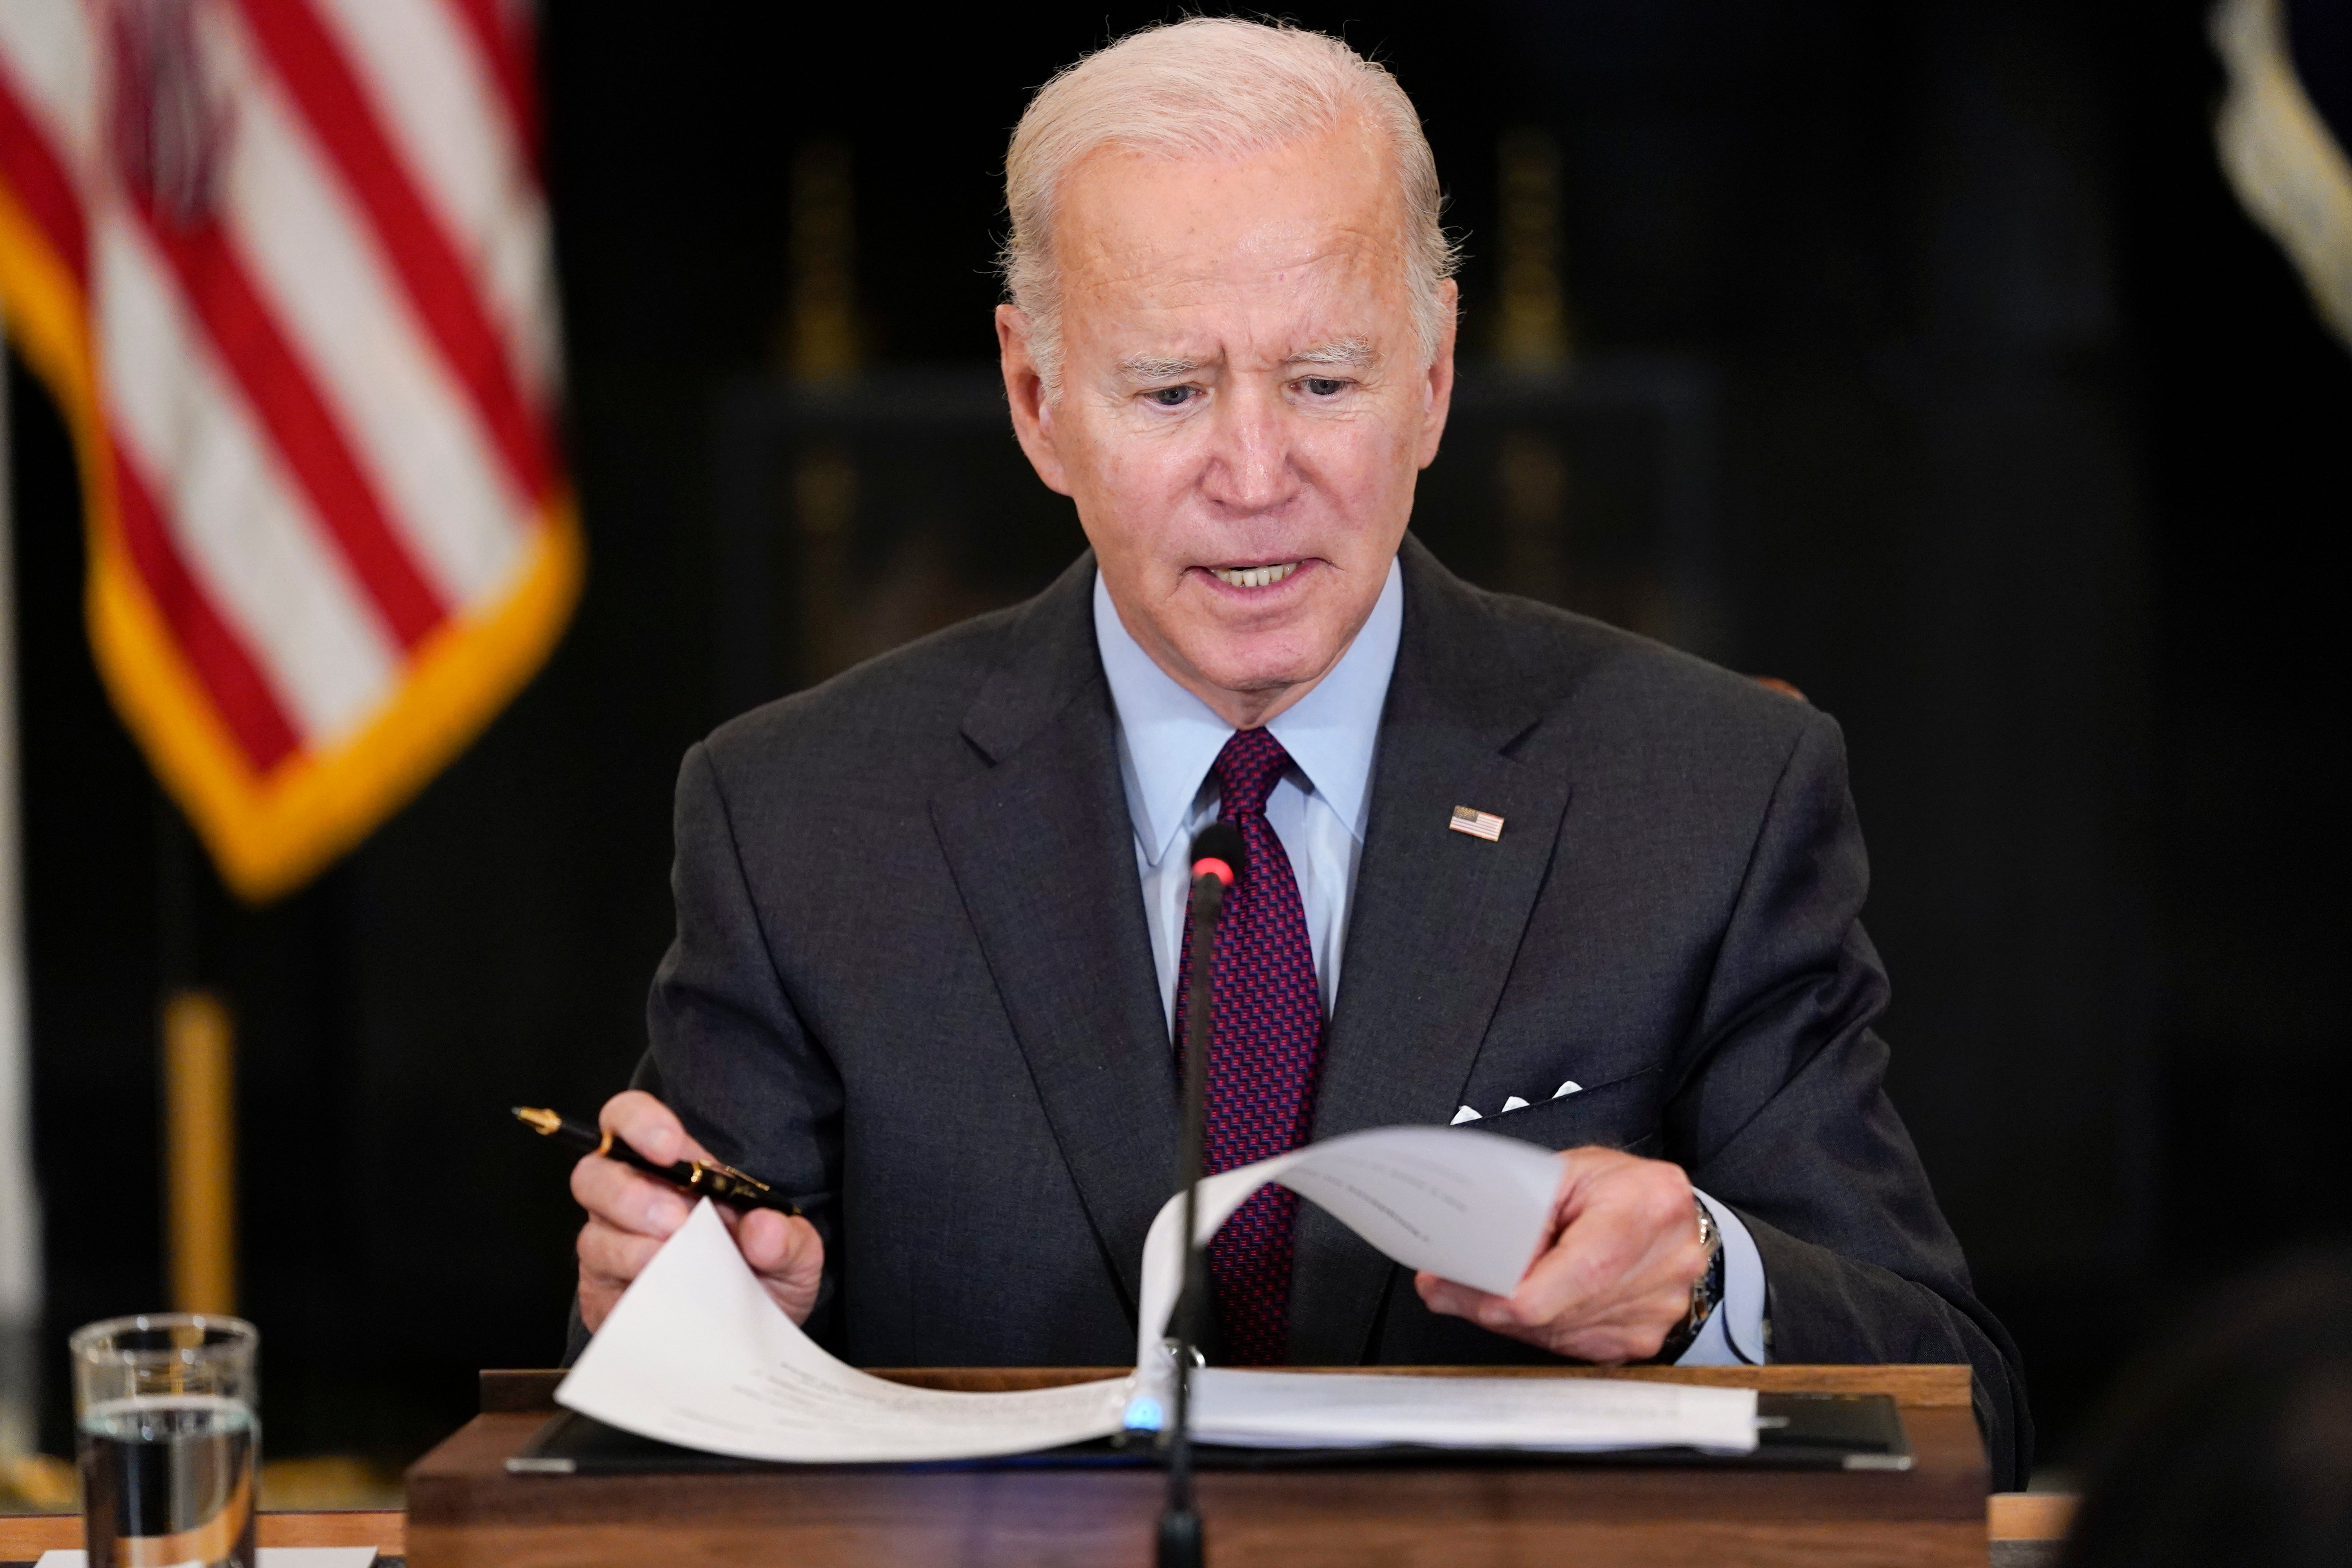 Biden speaks on reproductive rights on Tuesday October 4th